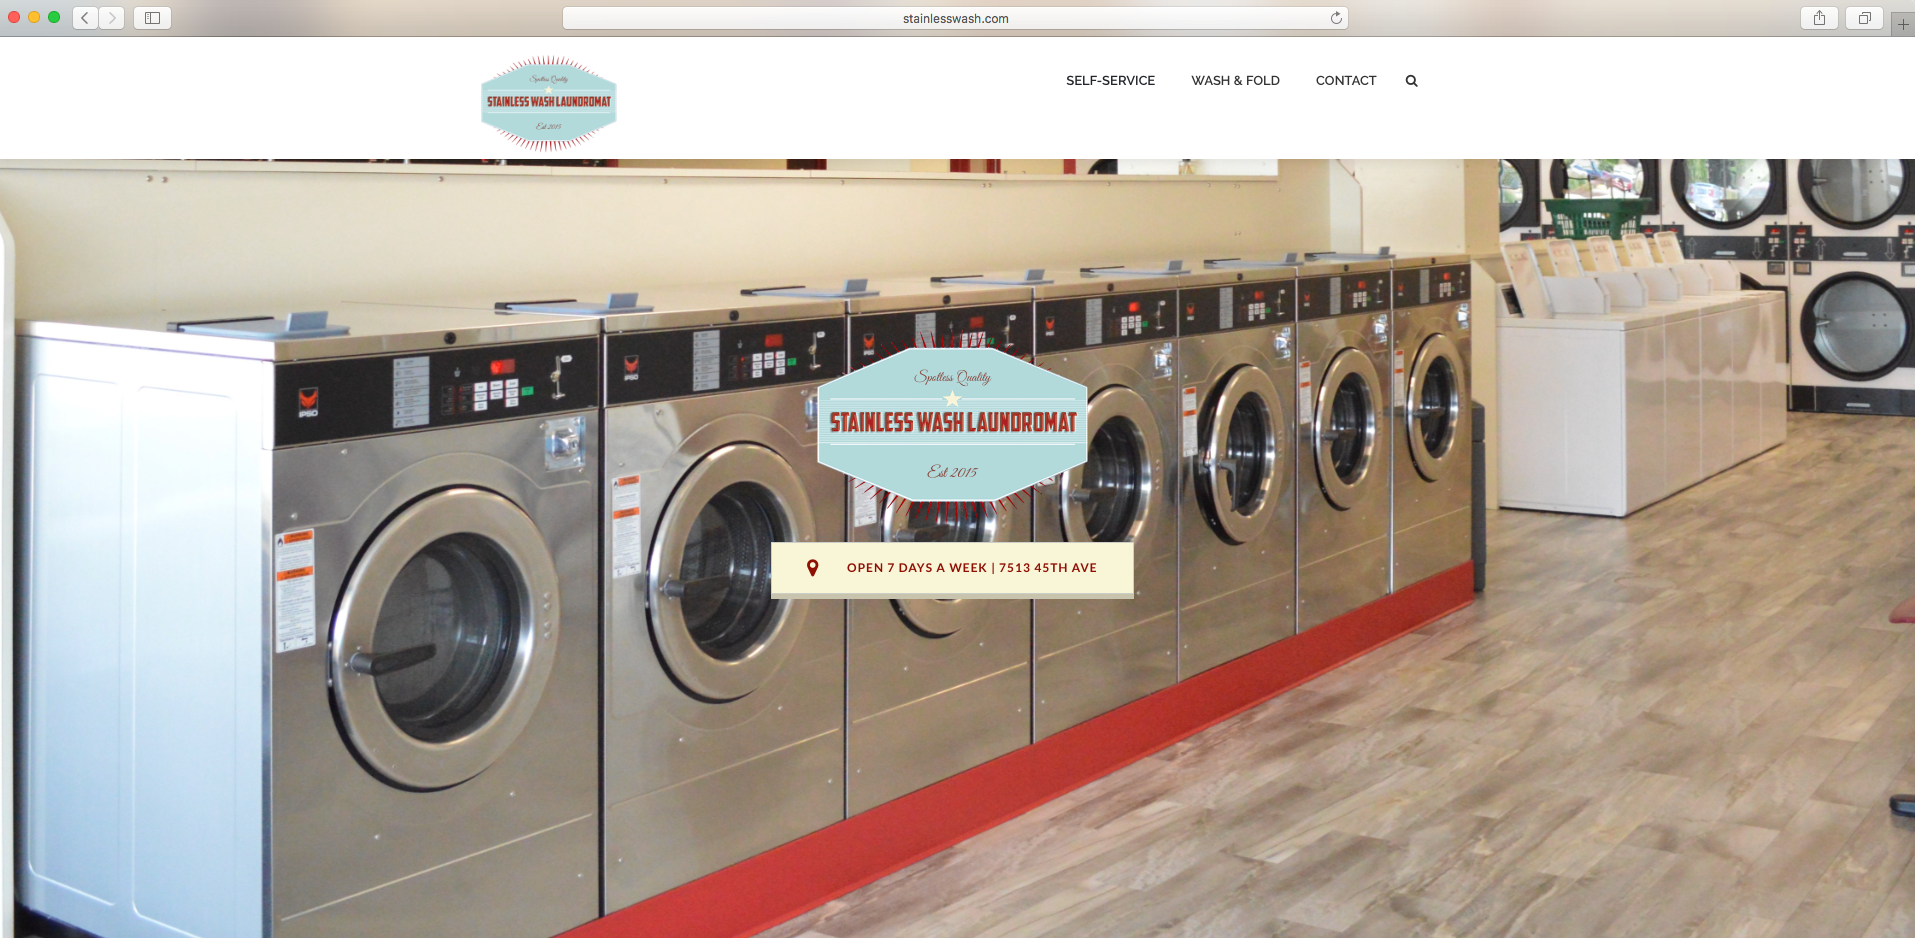 Stainless Wash Homepage